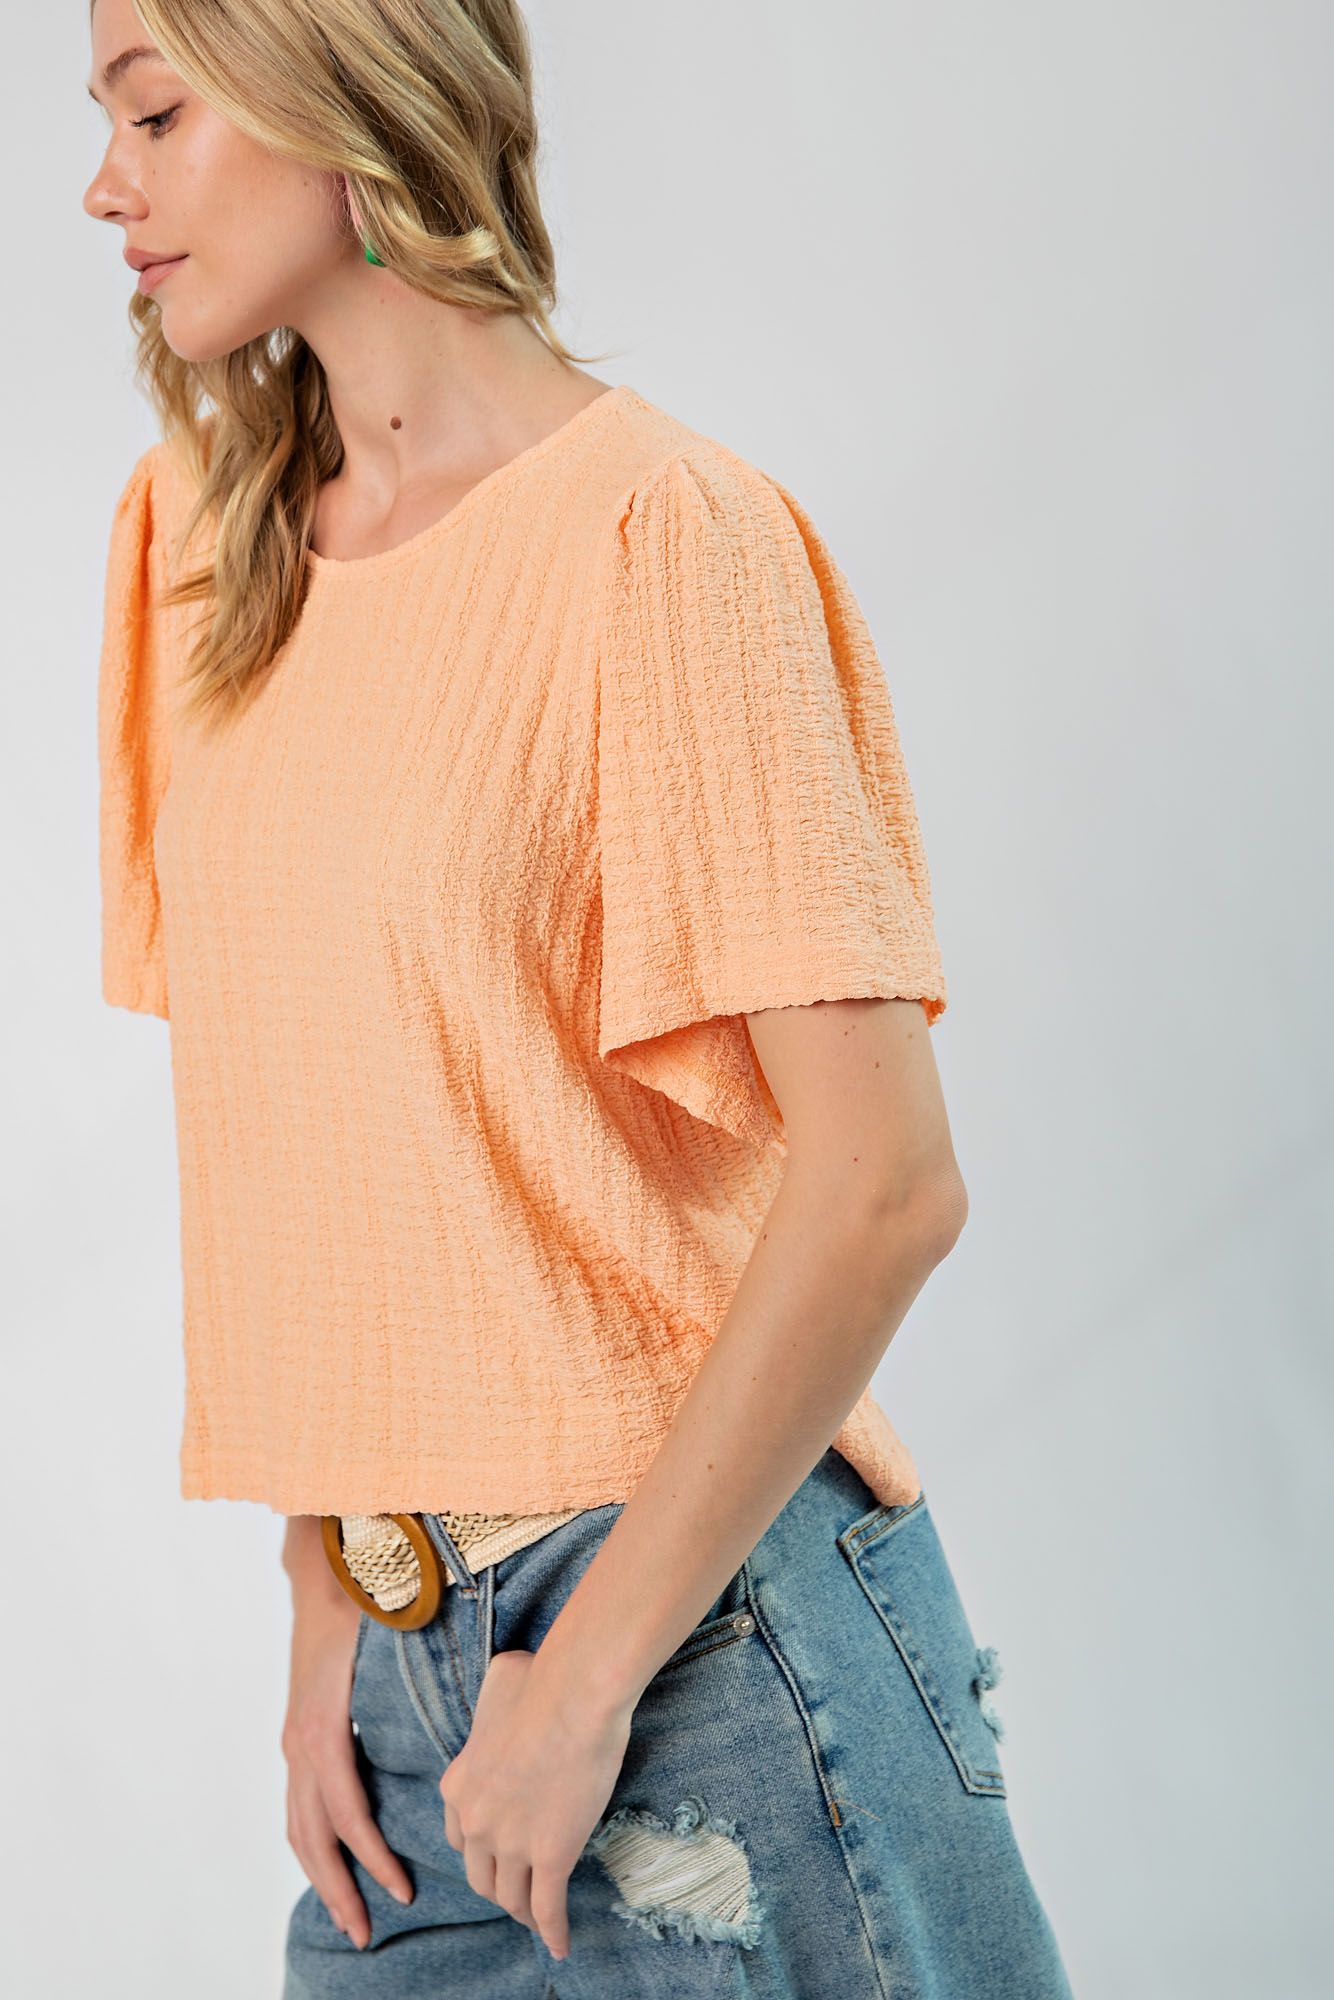 Easel Plus Textured Bell Short Sleeves Pleated Knit Tops